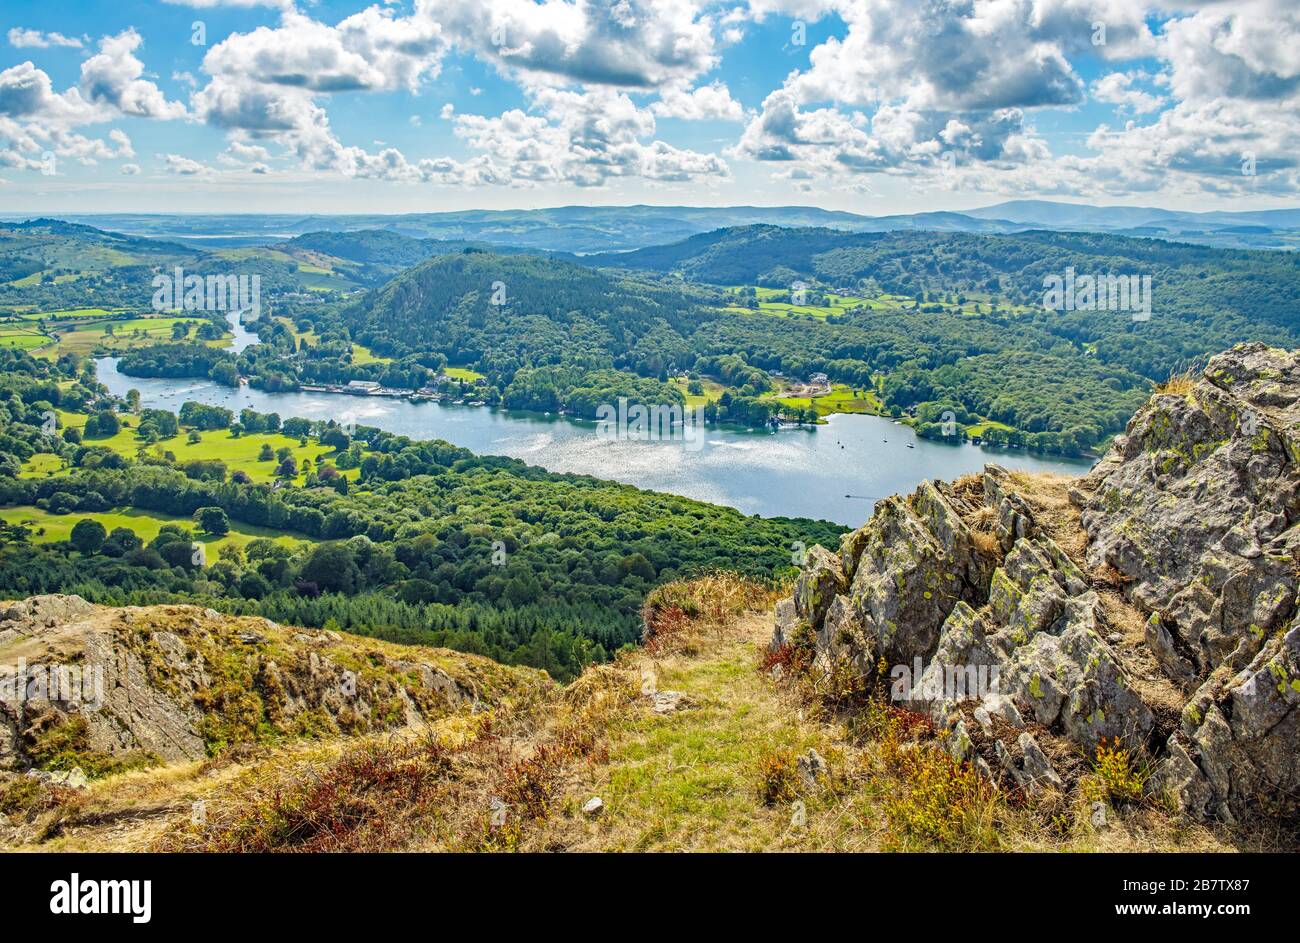 The view looking down onto Lake Windermere from the heights of Gummers How in the Lake District National Park. The walk to the top is quite steep. Stock Photo